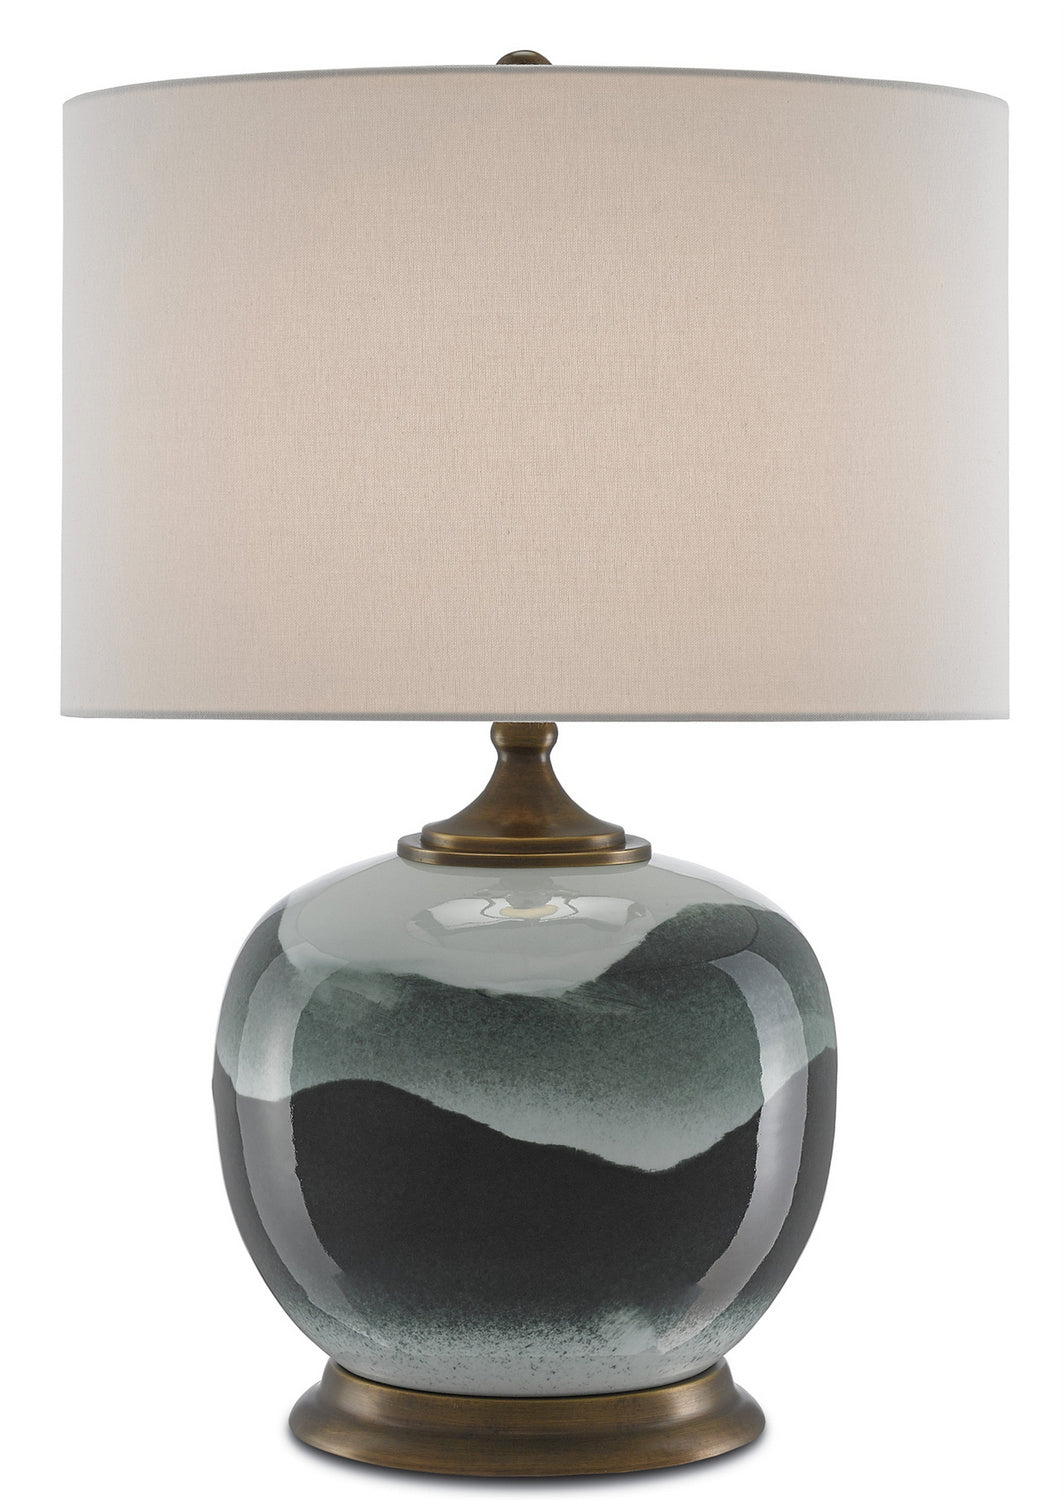 One Light Table Lamp from the Boreal collection in White/Green/Antique Brass finish